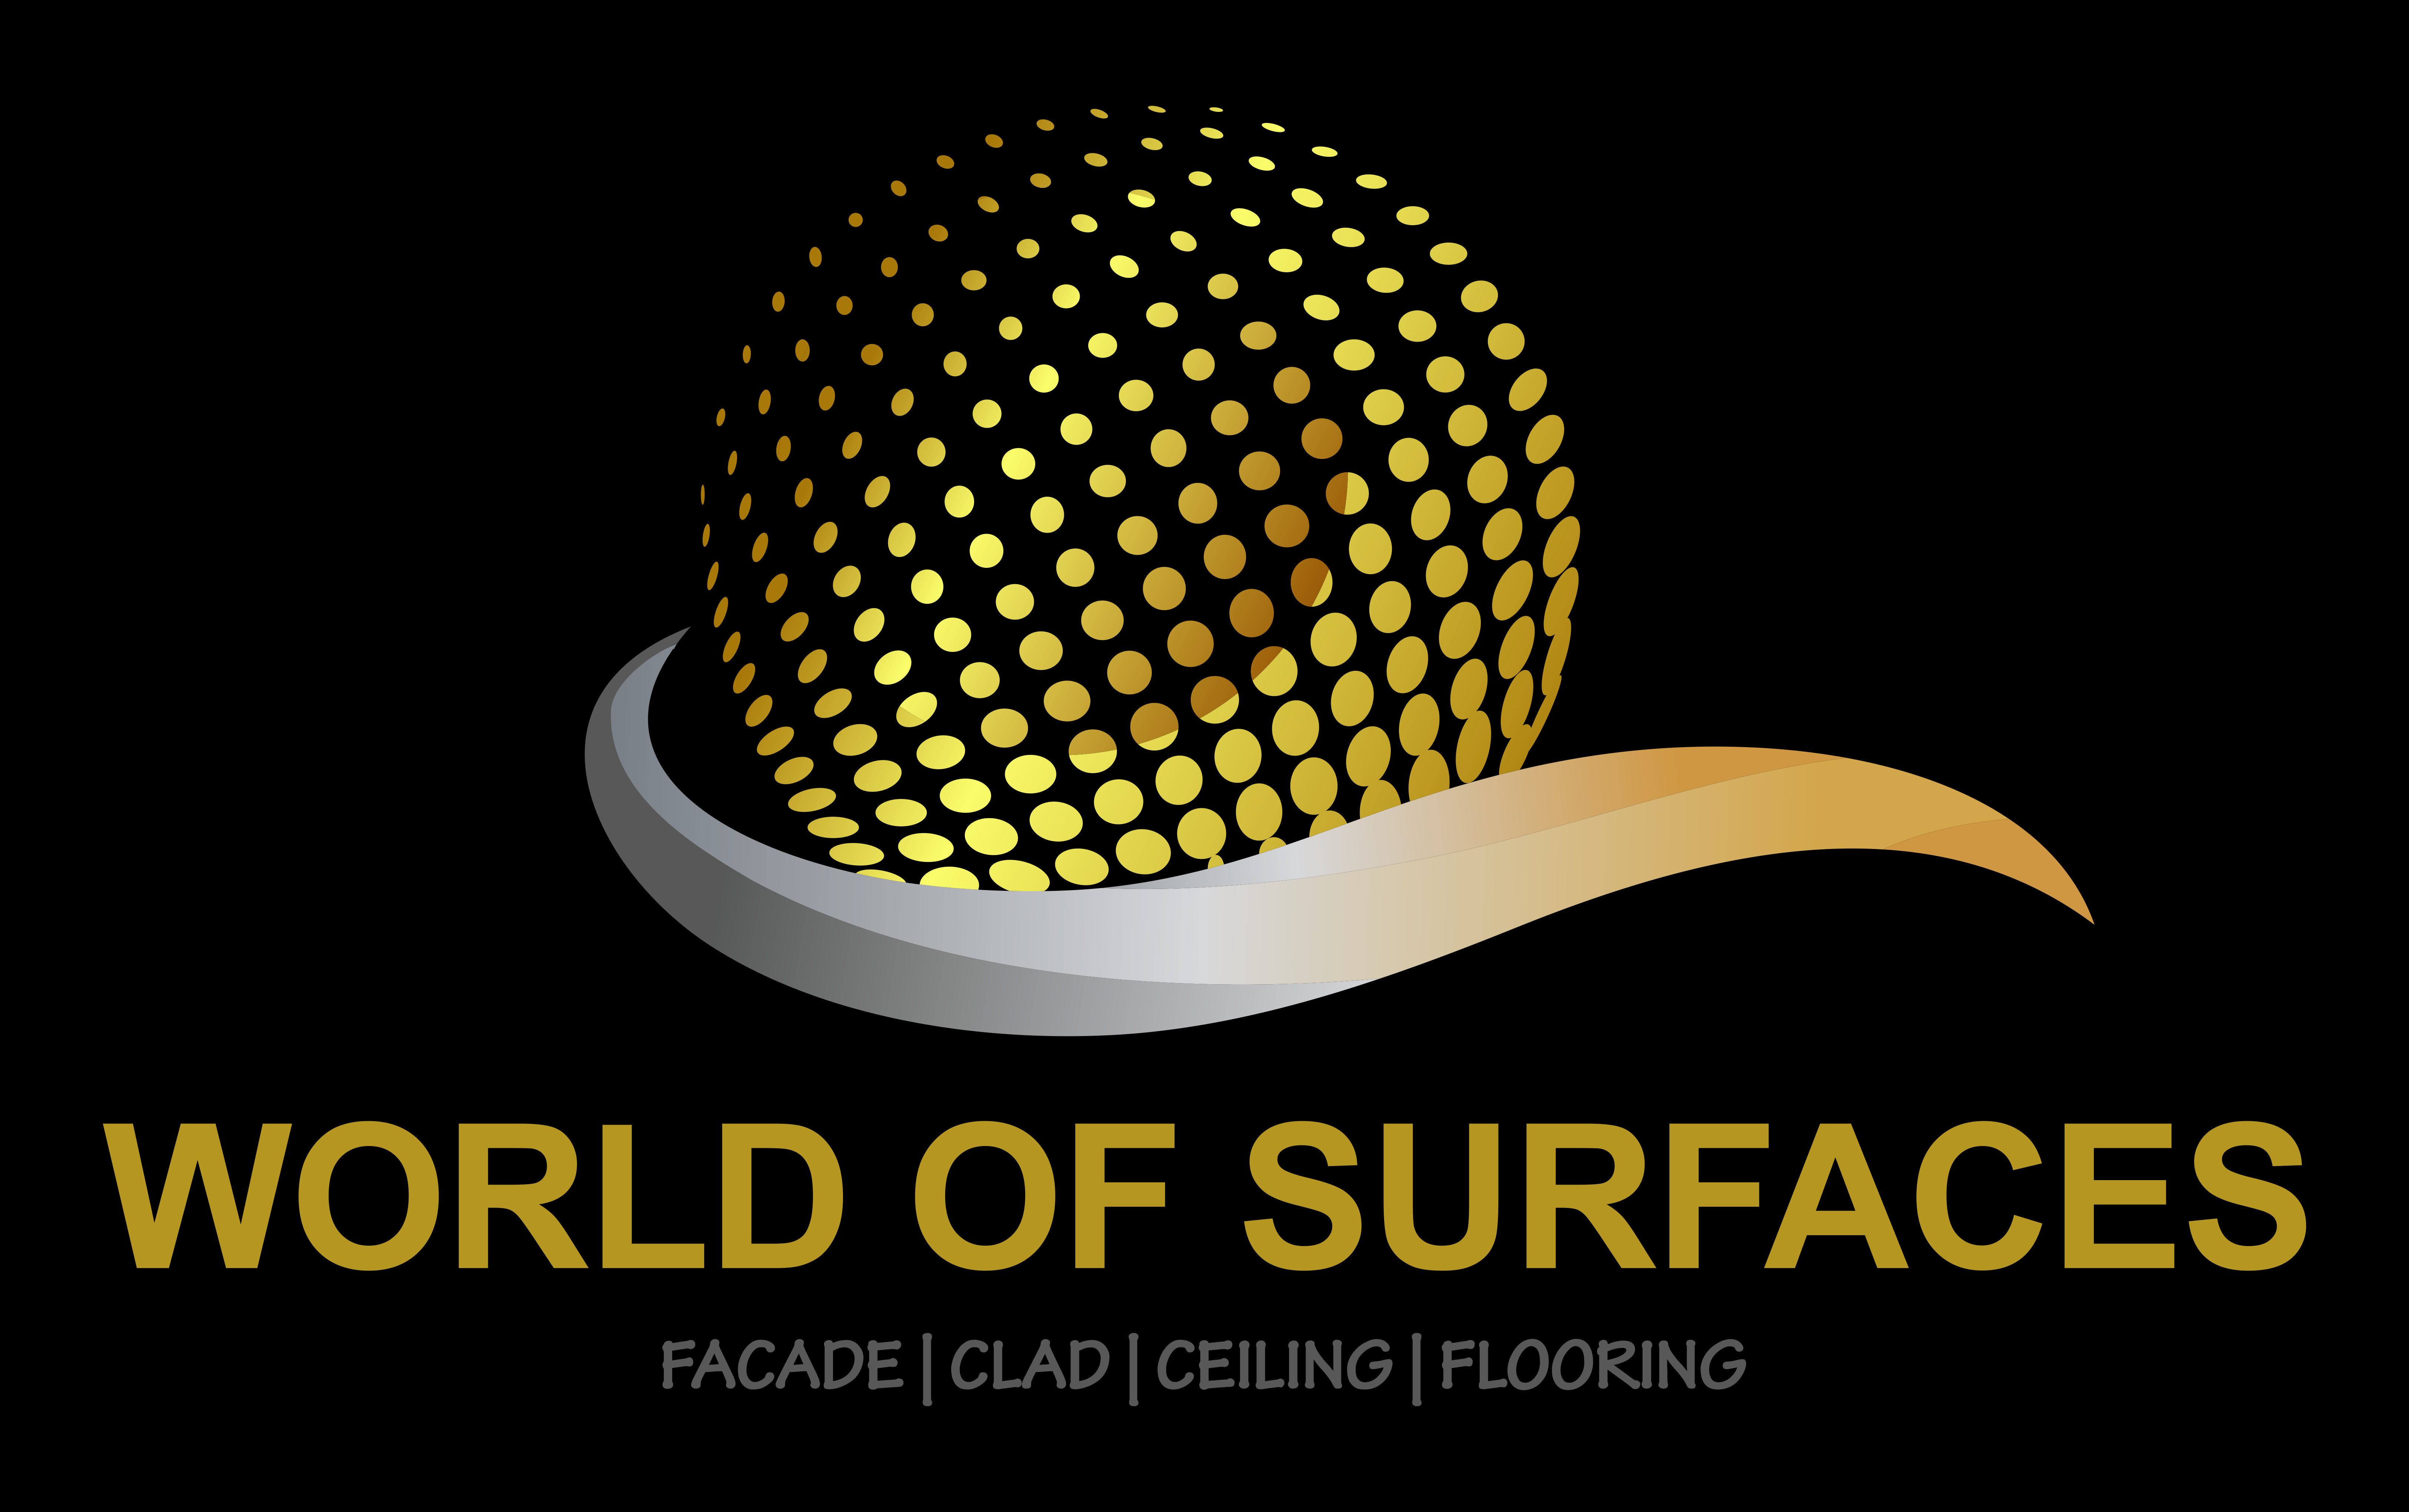 World of Surfaces